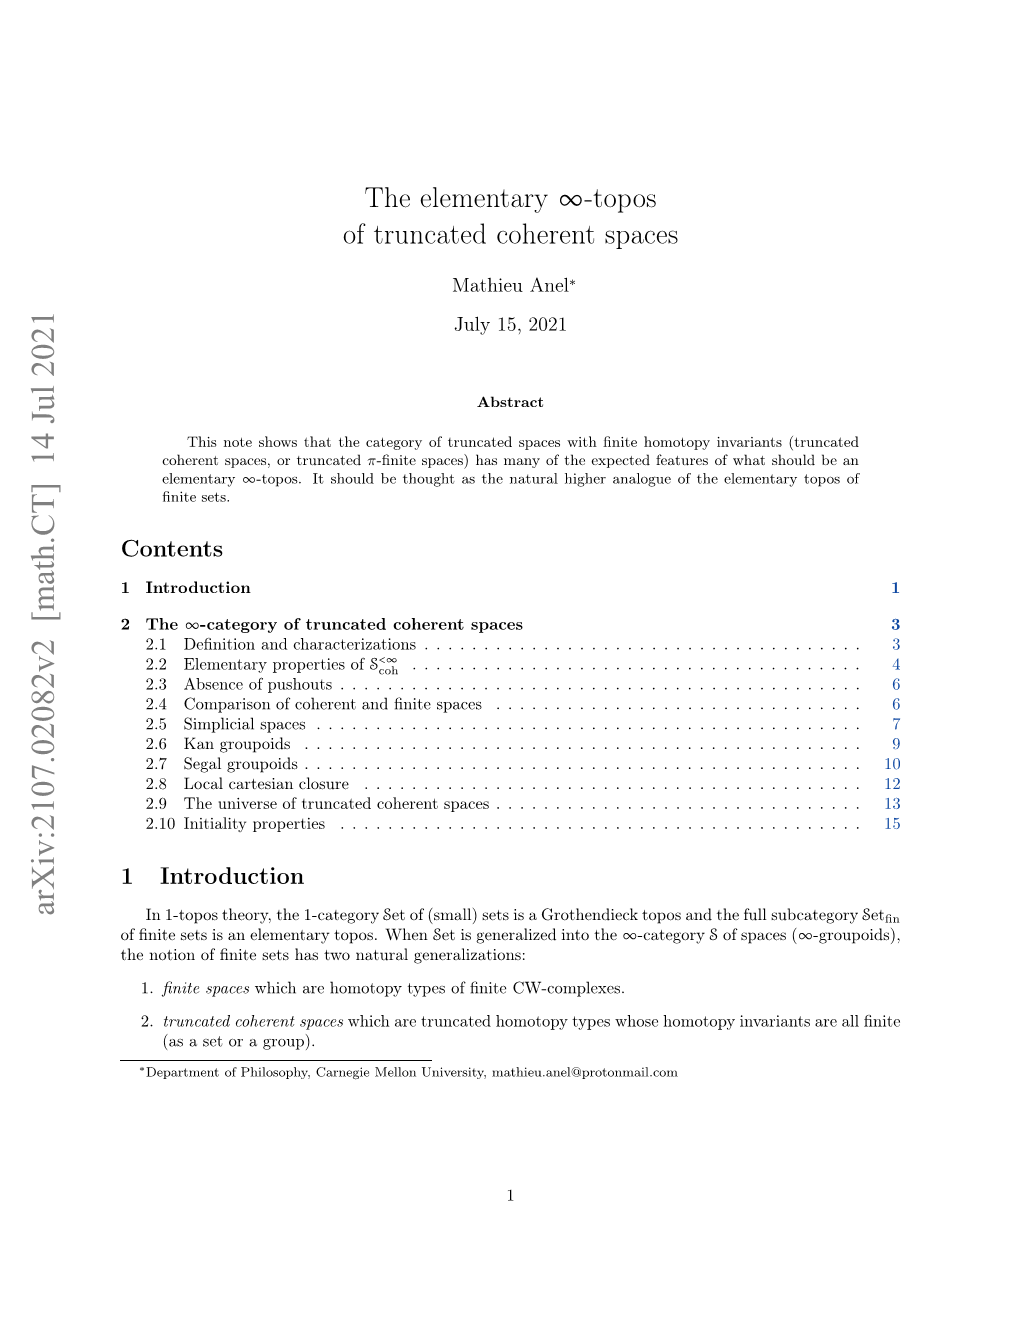 The Elementary Infinity-Topos of Truncated Coherent Spaces